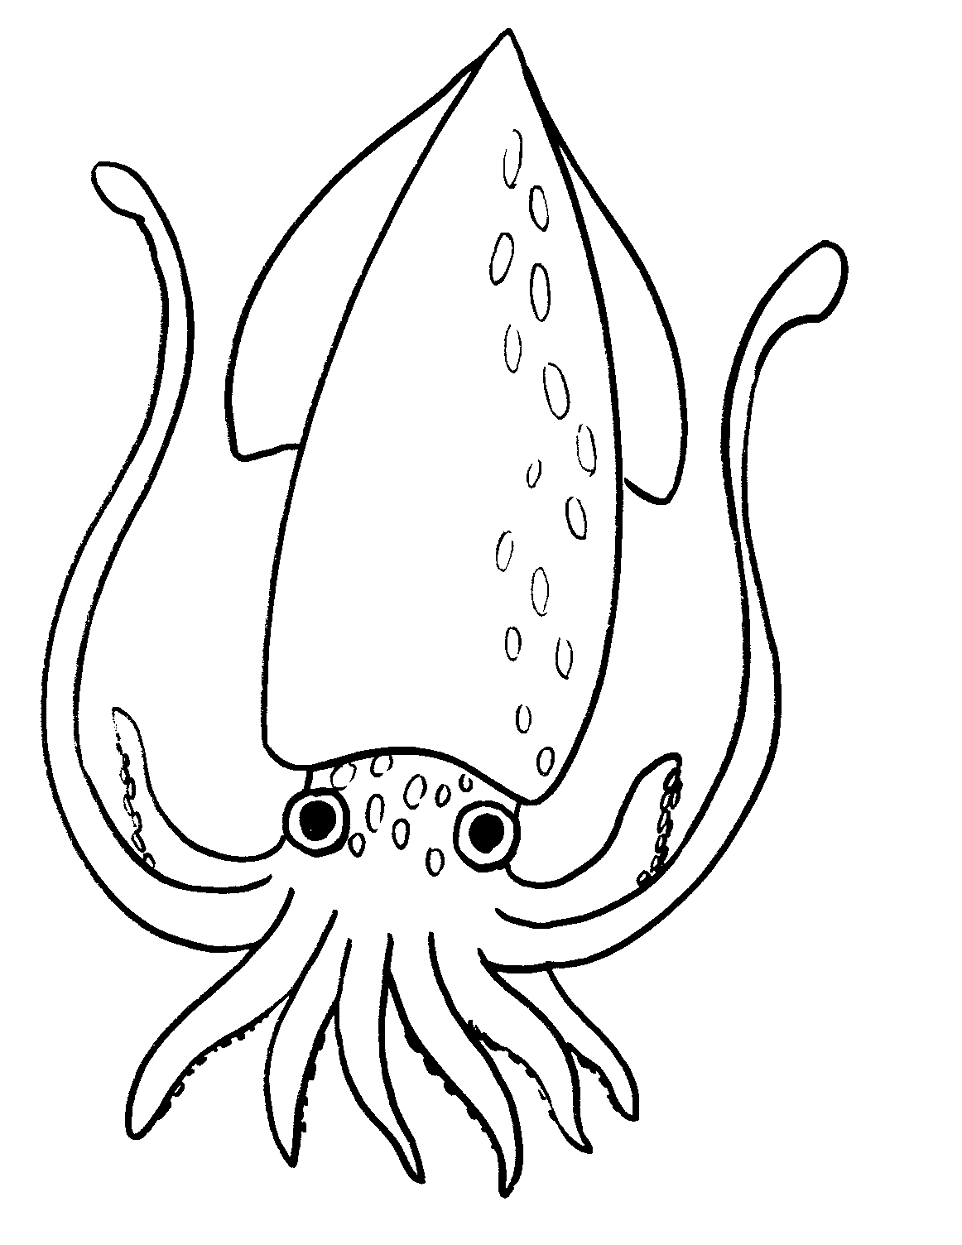 Printable Squid Free Coloring Page